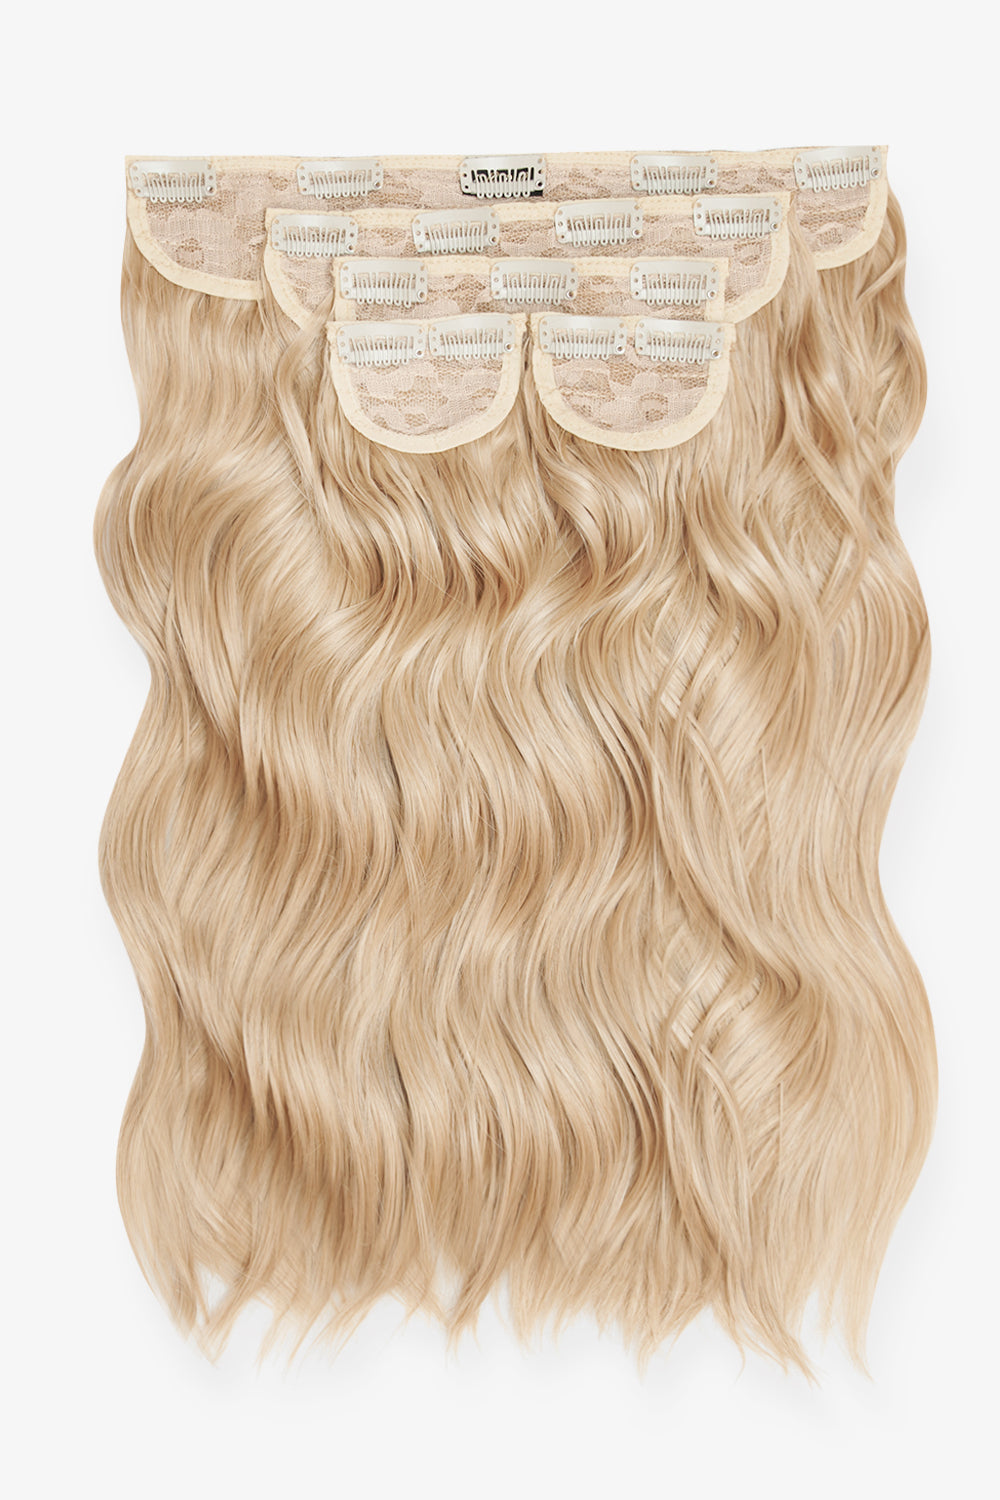 Super Thick 16’’ 5 Piece Brushed Out Wave Clip In Hair Extensions + Hair Care Bundle - Champagne Blonde